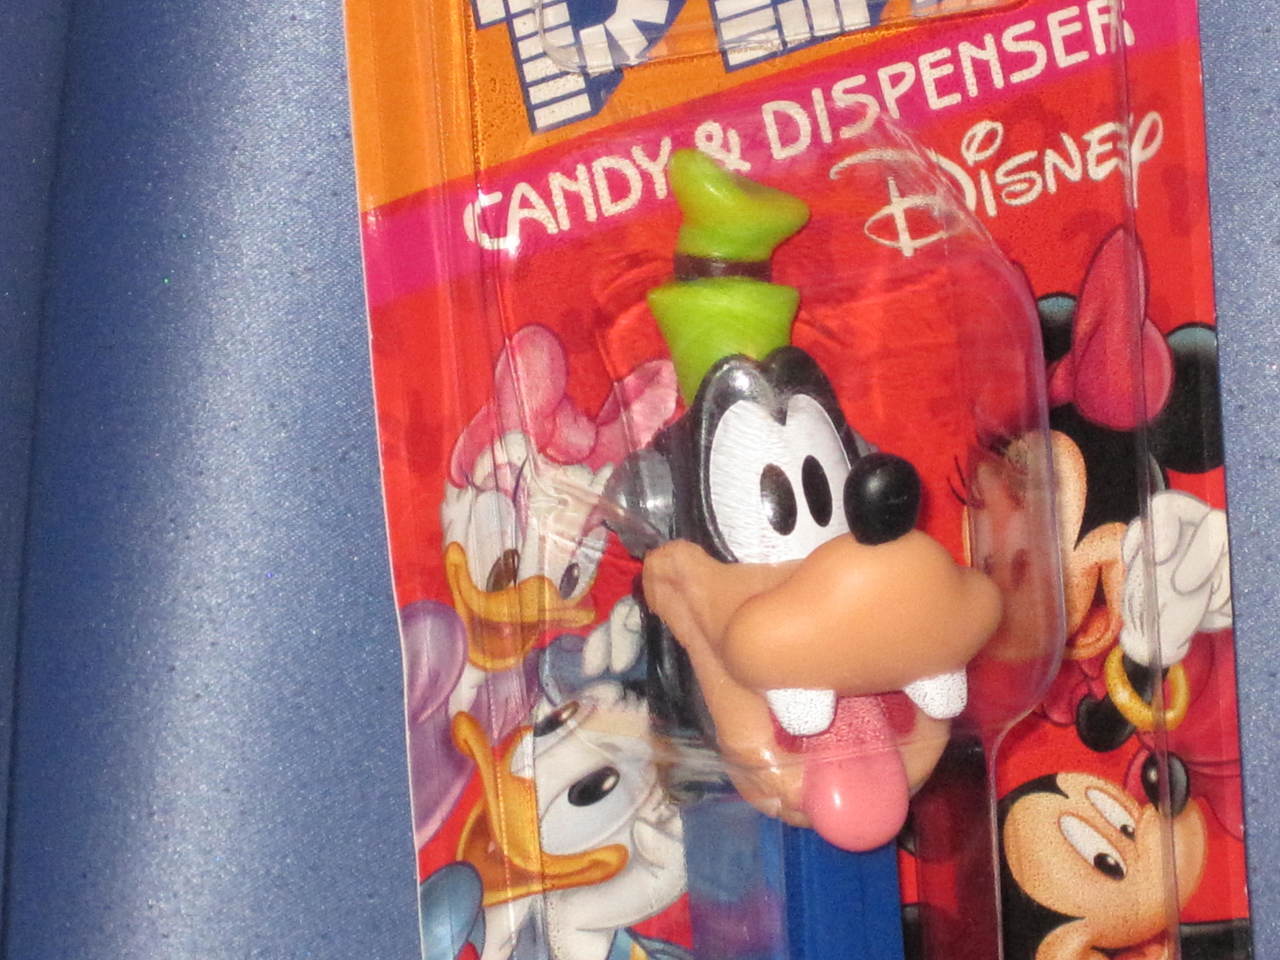 Primary image for Disney "Goofy" Candy Dispenser by PEZ.